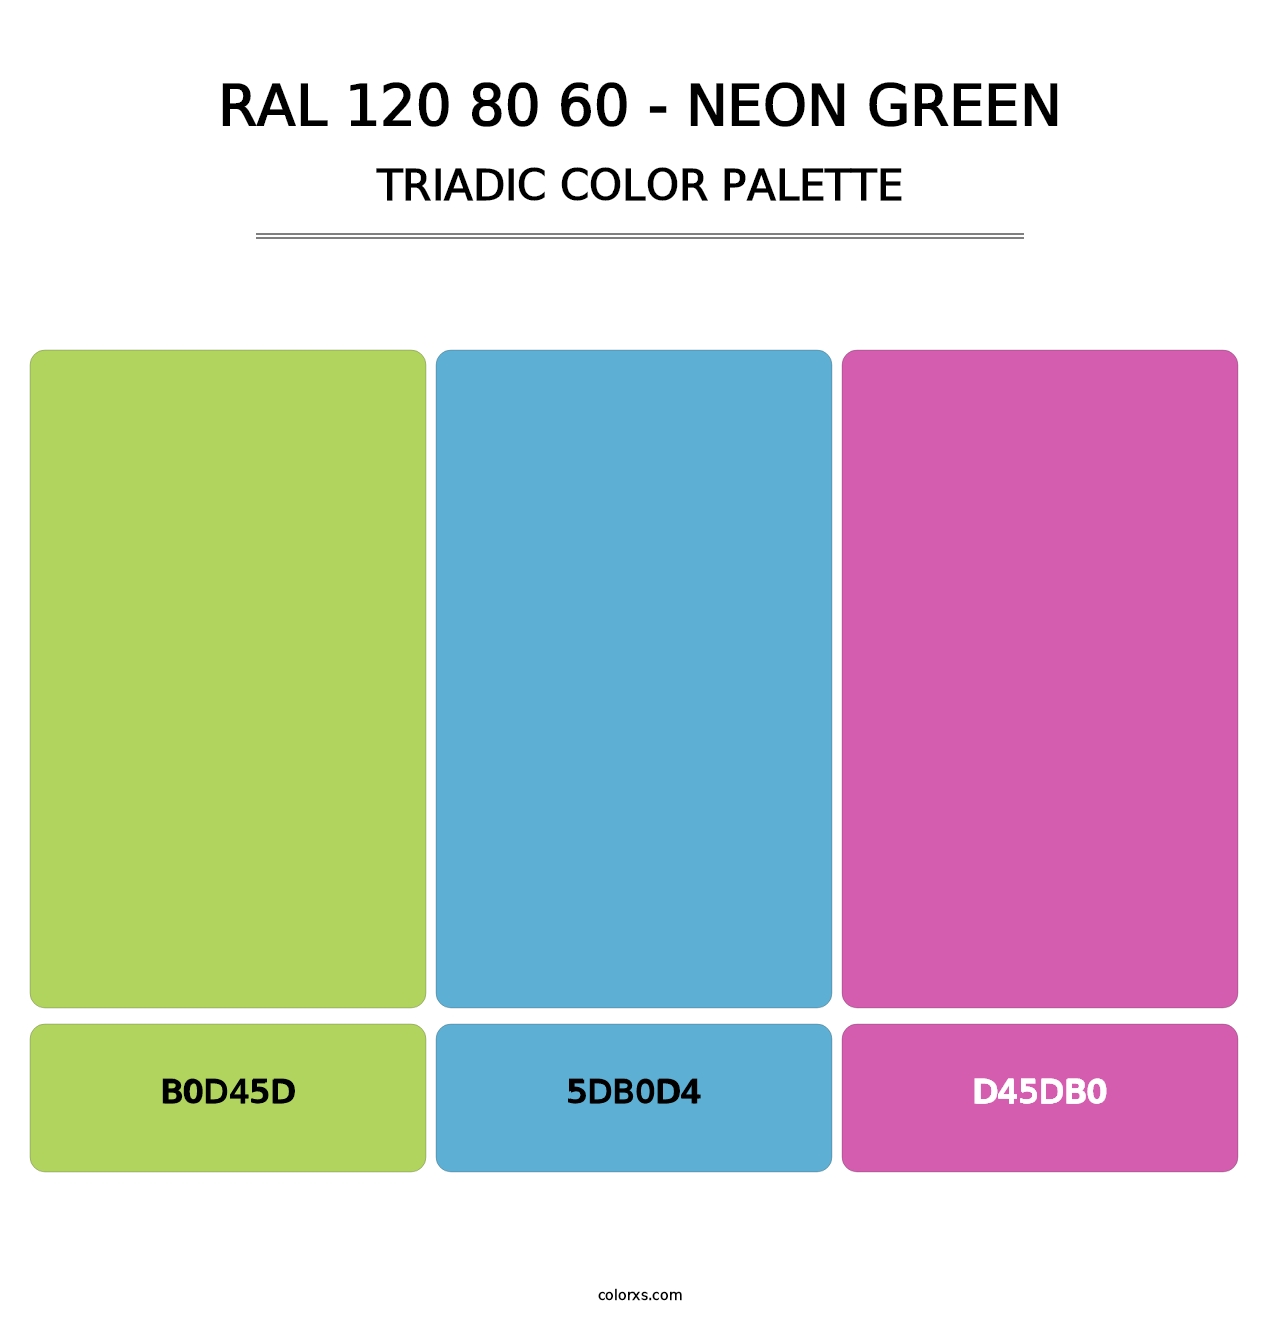 RAL 120 80 60 - Neon Green - Triadic Color Palette